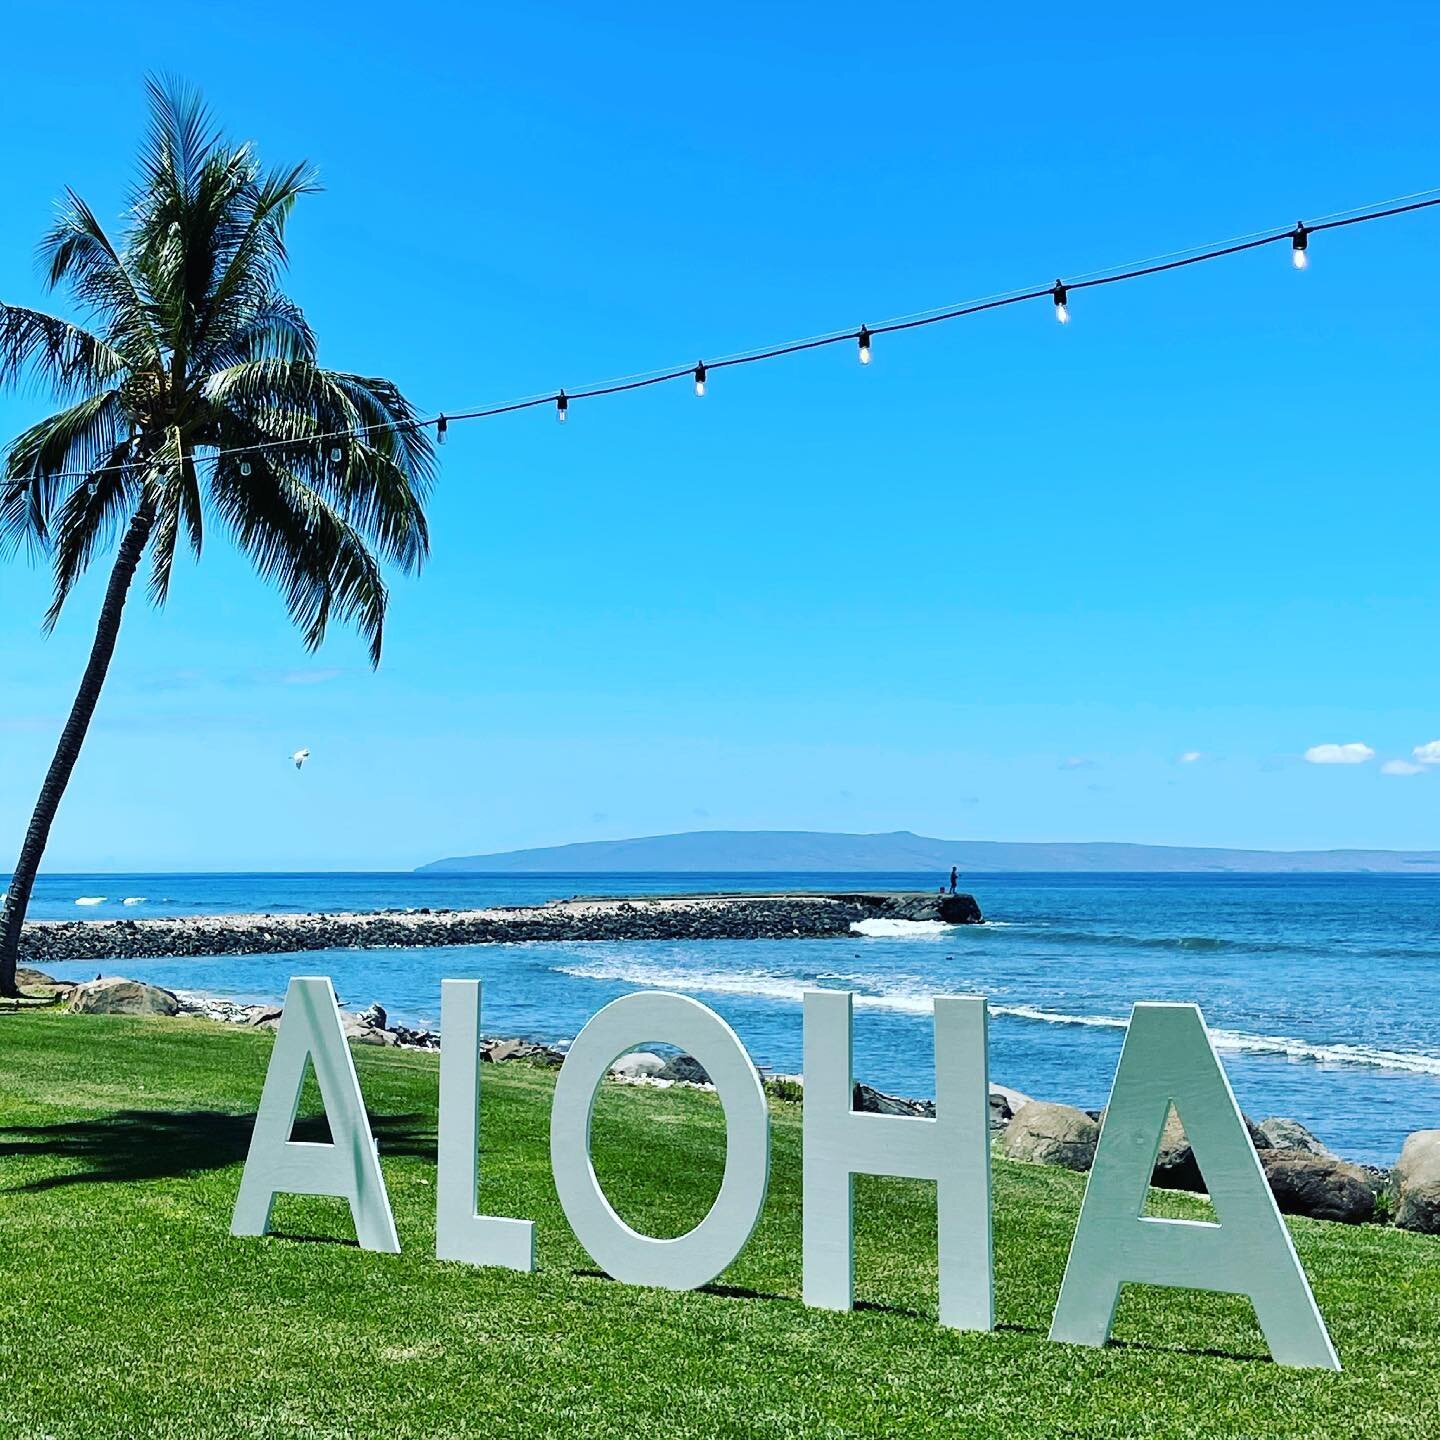 Here&rsquo;s our new ALOHA sign for rent! 
.
.
.
.
@olowaluplantationhouse #alohasign 
#customwoodwork #rusticdecor #mauiweddingboards #customsigns #weddingideas #decor #weddingdetails #weddingdesign #eventdecor #eventdetails #mauiweddingdesign #maui